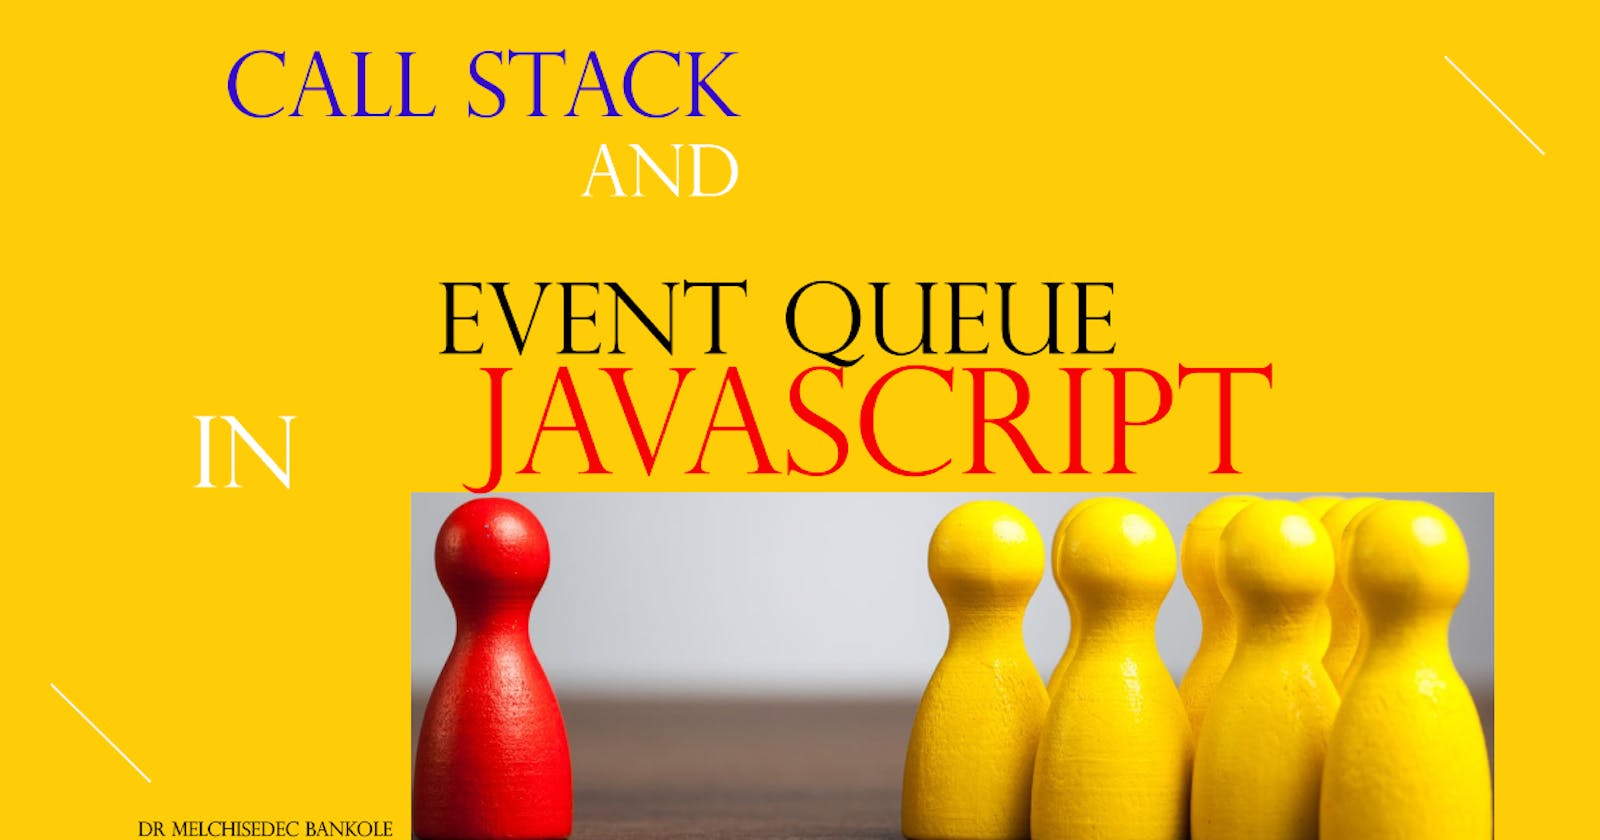 How The Combined Operation of The Call Stack and Event Queue Contribute to The Responsiveness and Efficiency of JavaScript Applications